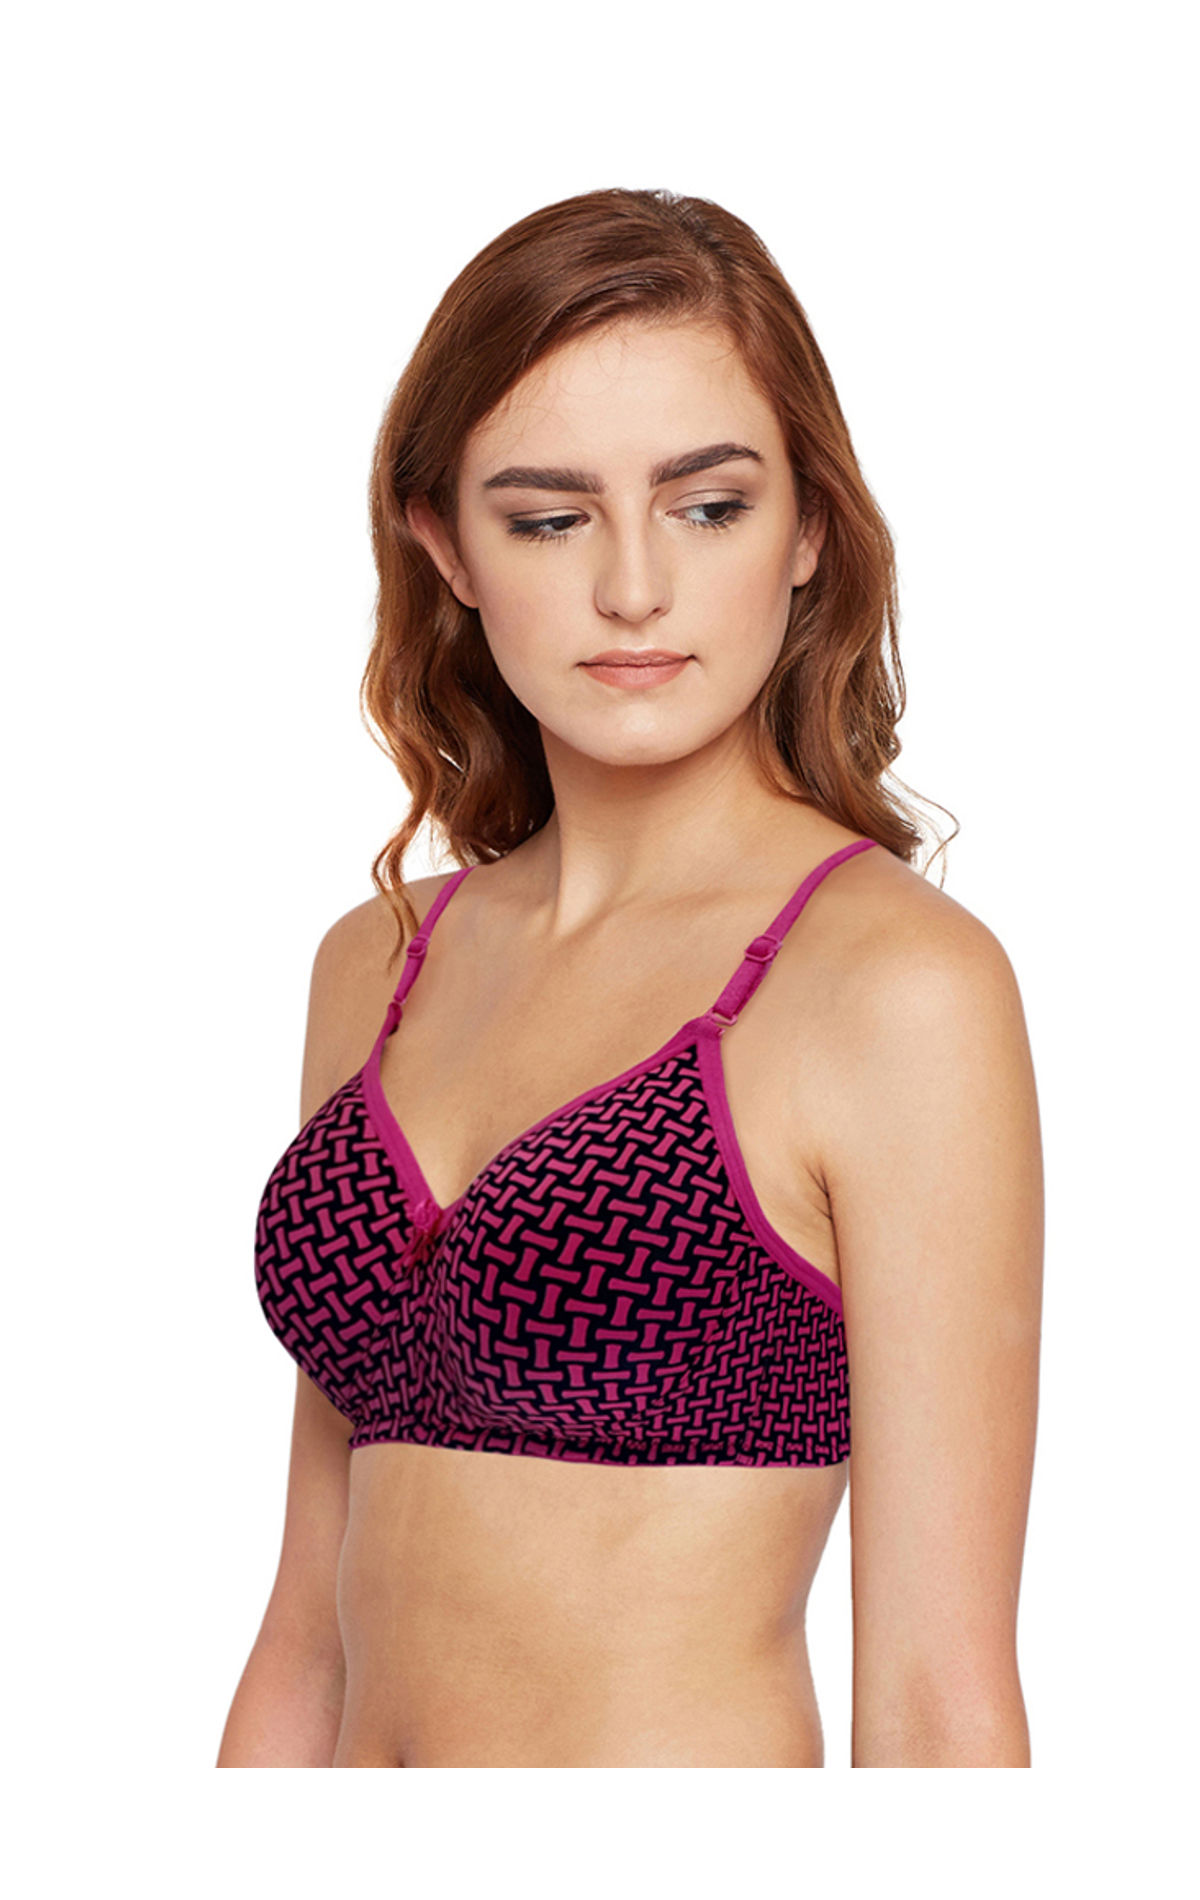 Bodycare Womens Seamless Cotton Printed Padded Bra-6701a-pink, 6701a-pink